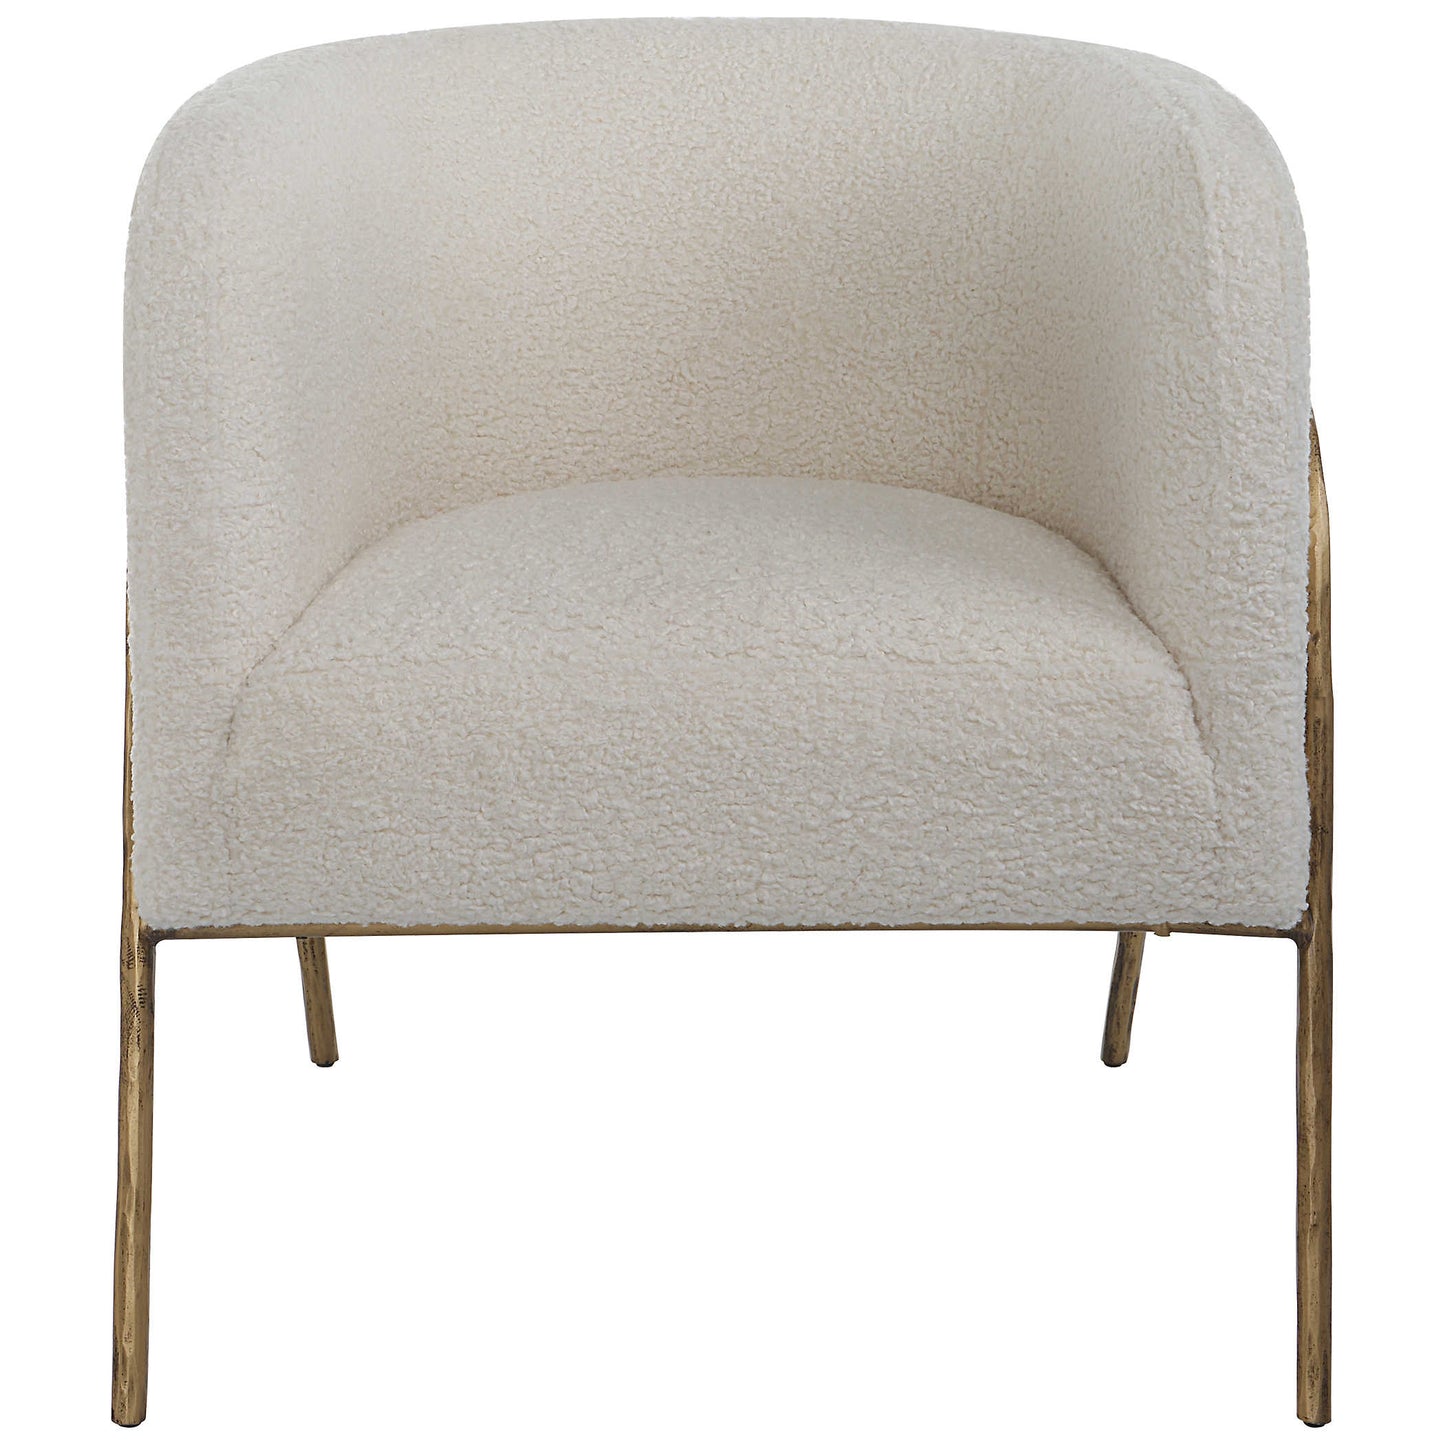 Jacob Accent Chair, Shearling